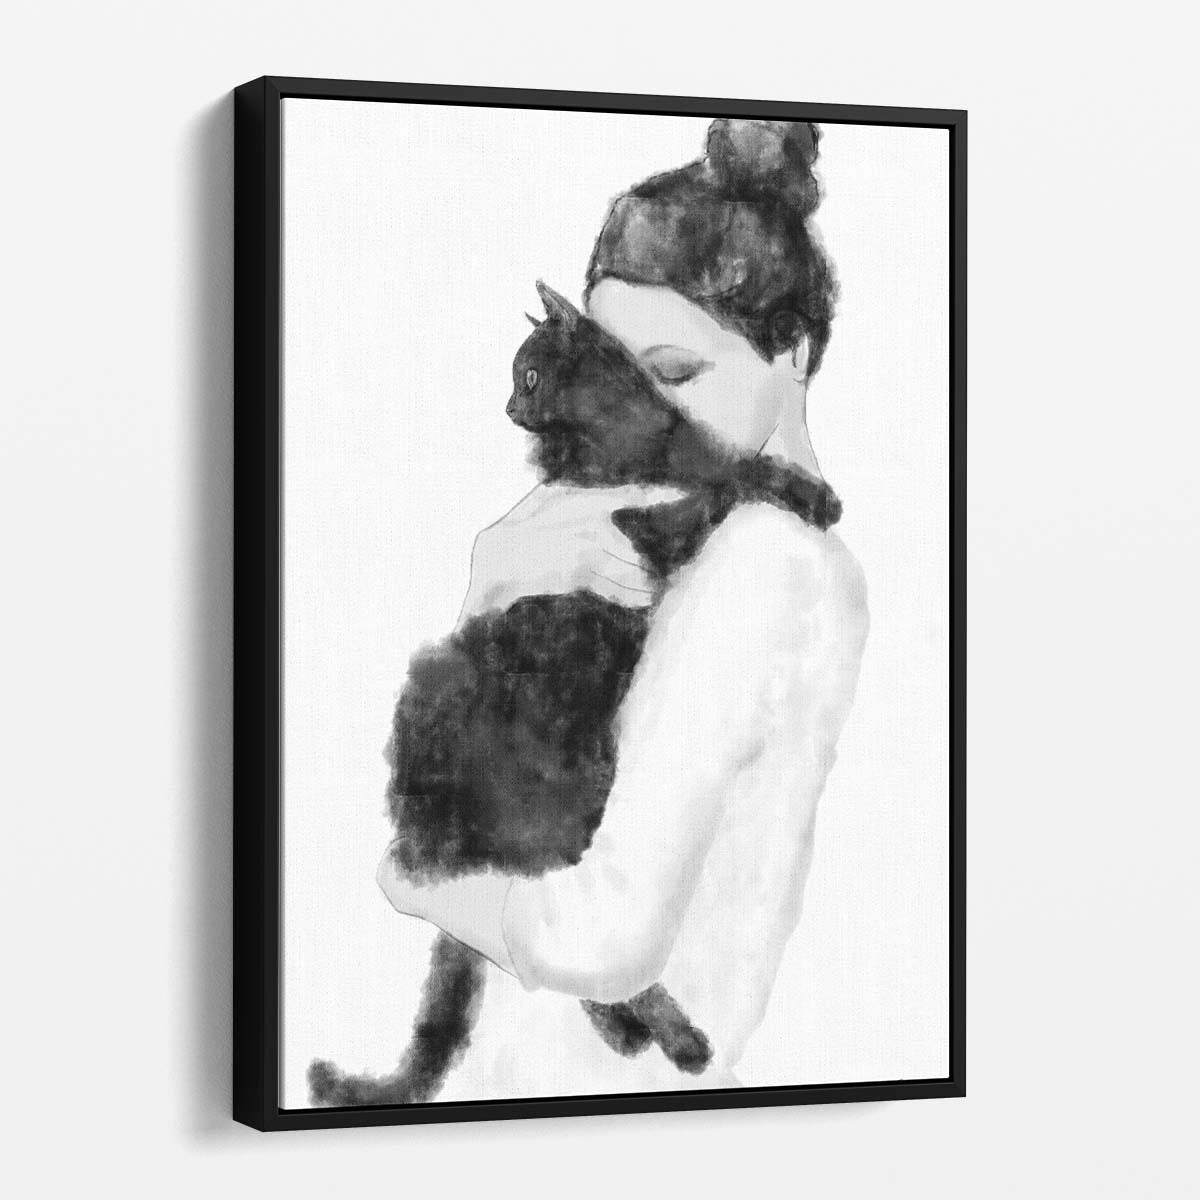 Romantic Watercolor Illustration of Woman Embracing Cat, Monochrome by Luxuriance Designs, made in USA